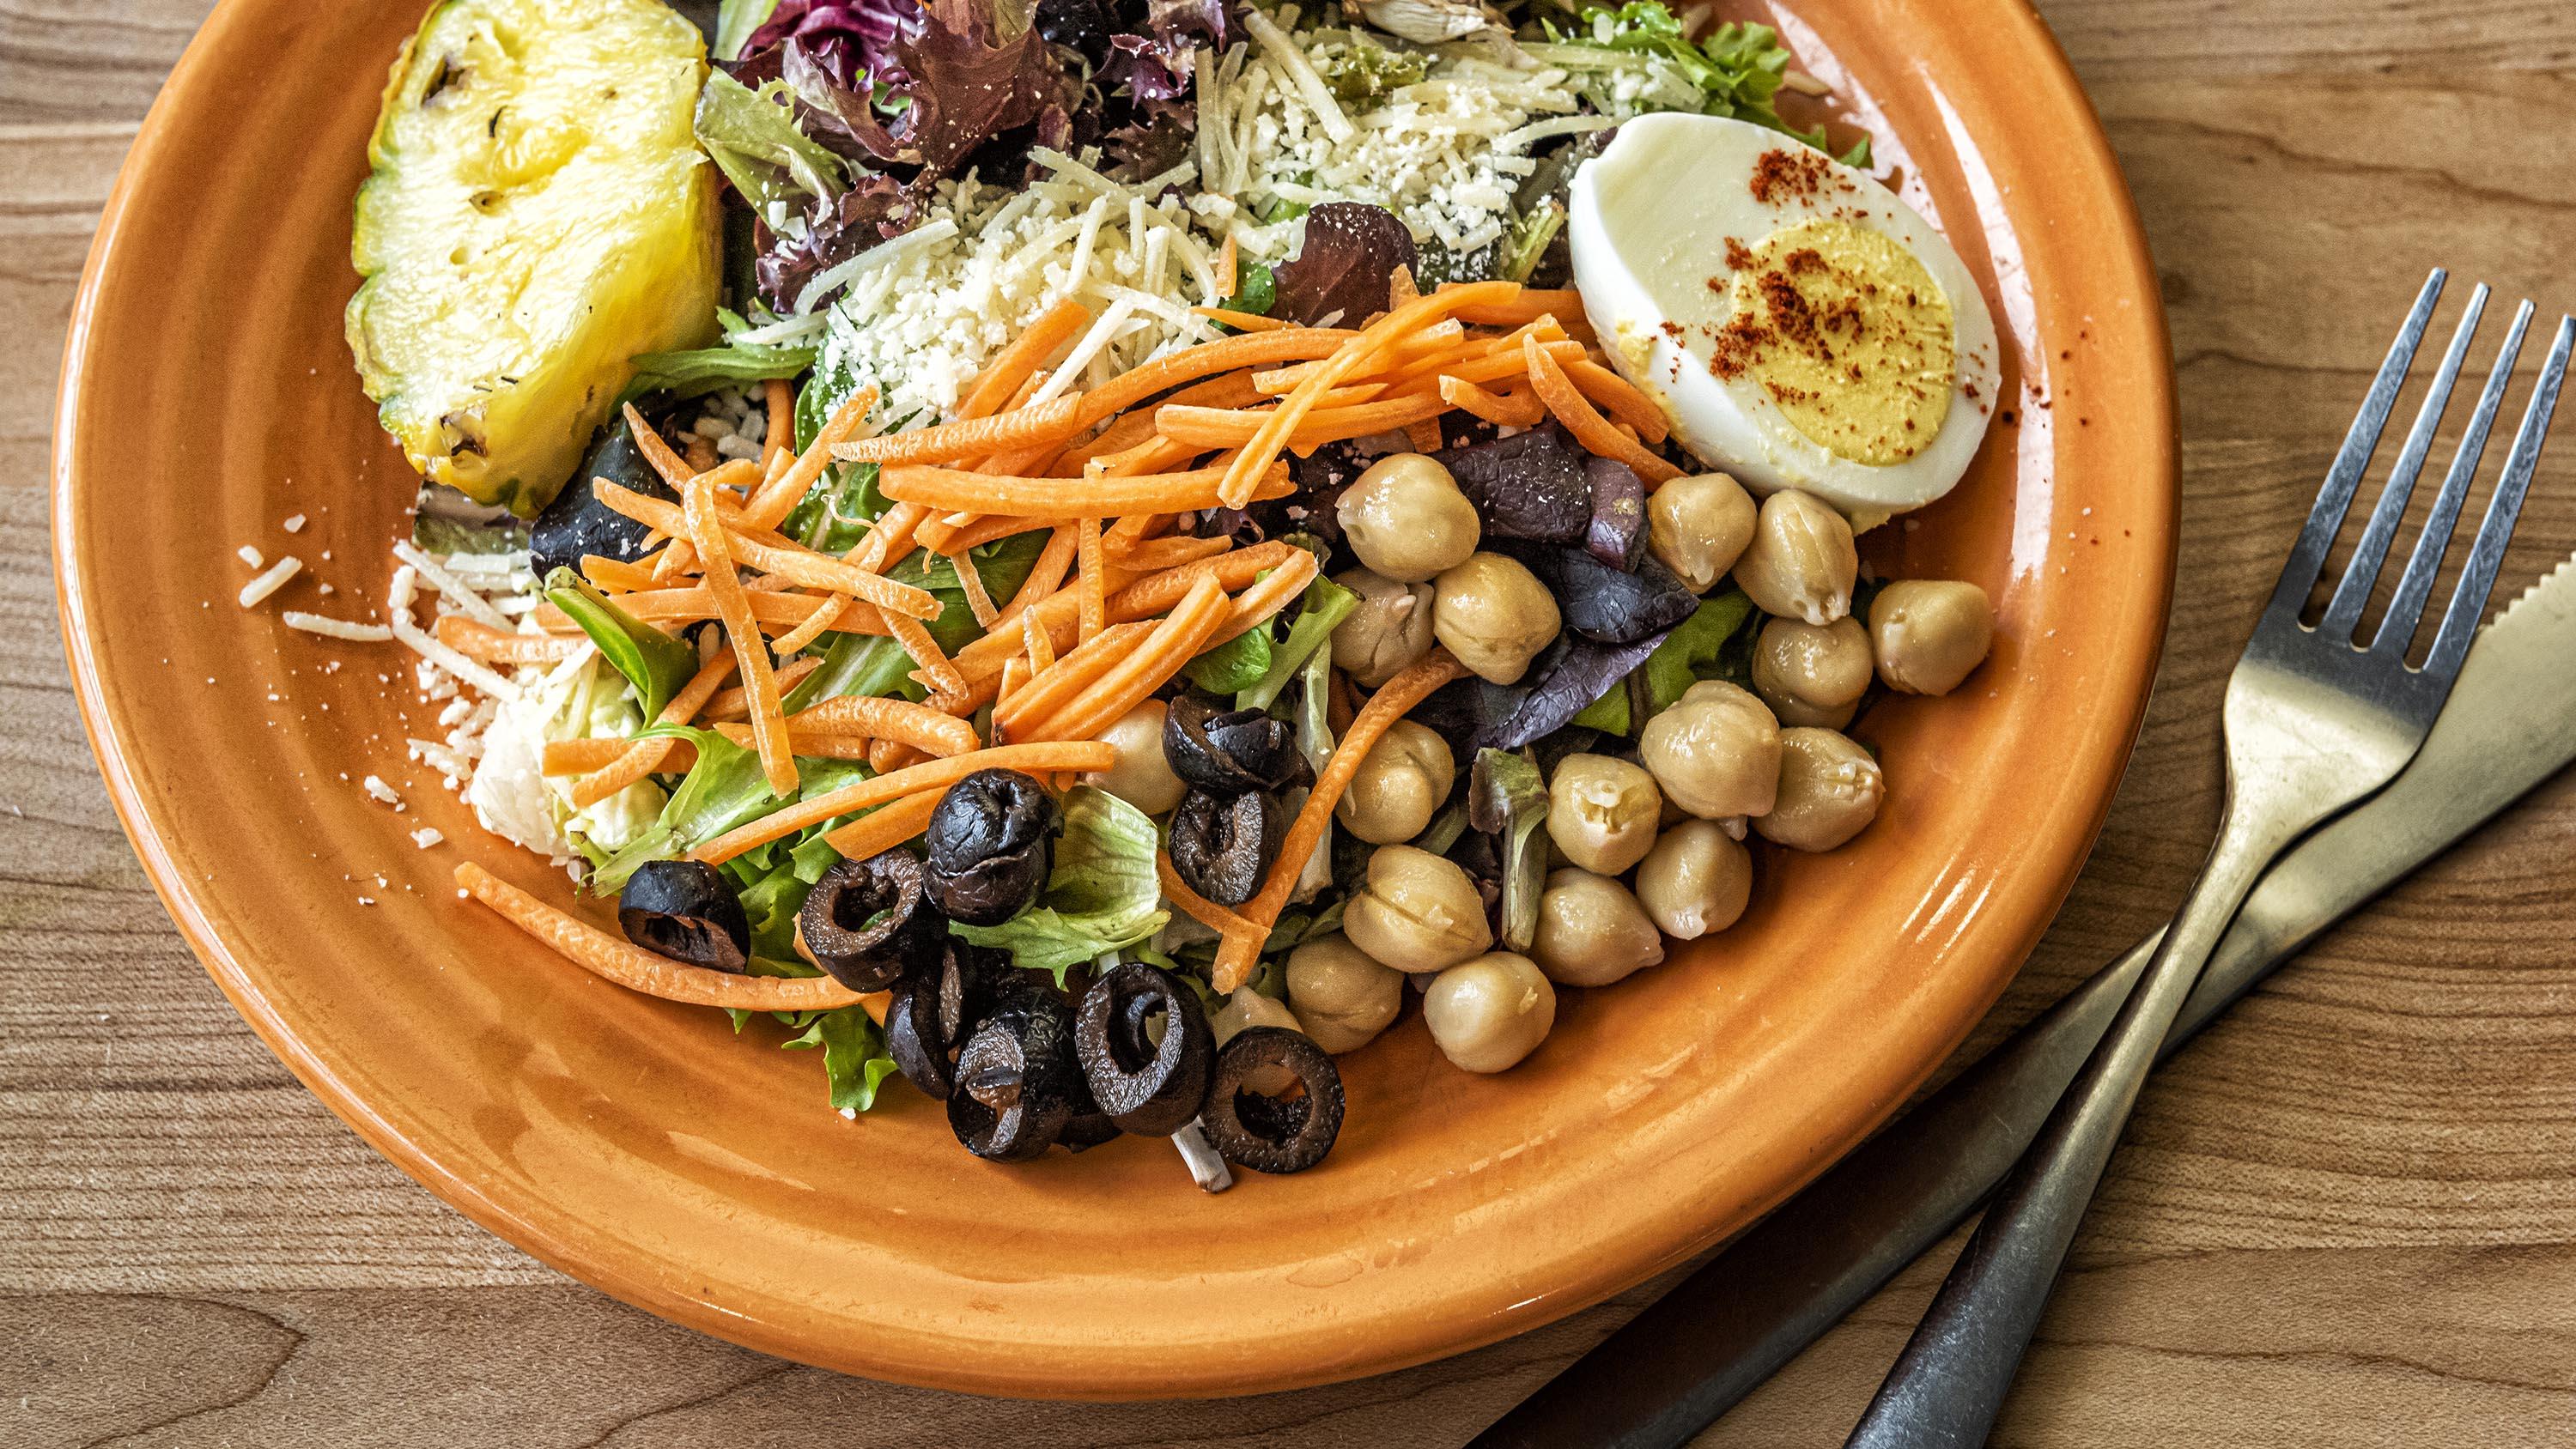 Salad, shredded carrots, black olives, and hard-boiled eggs on an orange plate in the Crow’s Nest Campus Restaurant.